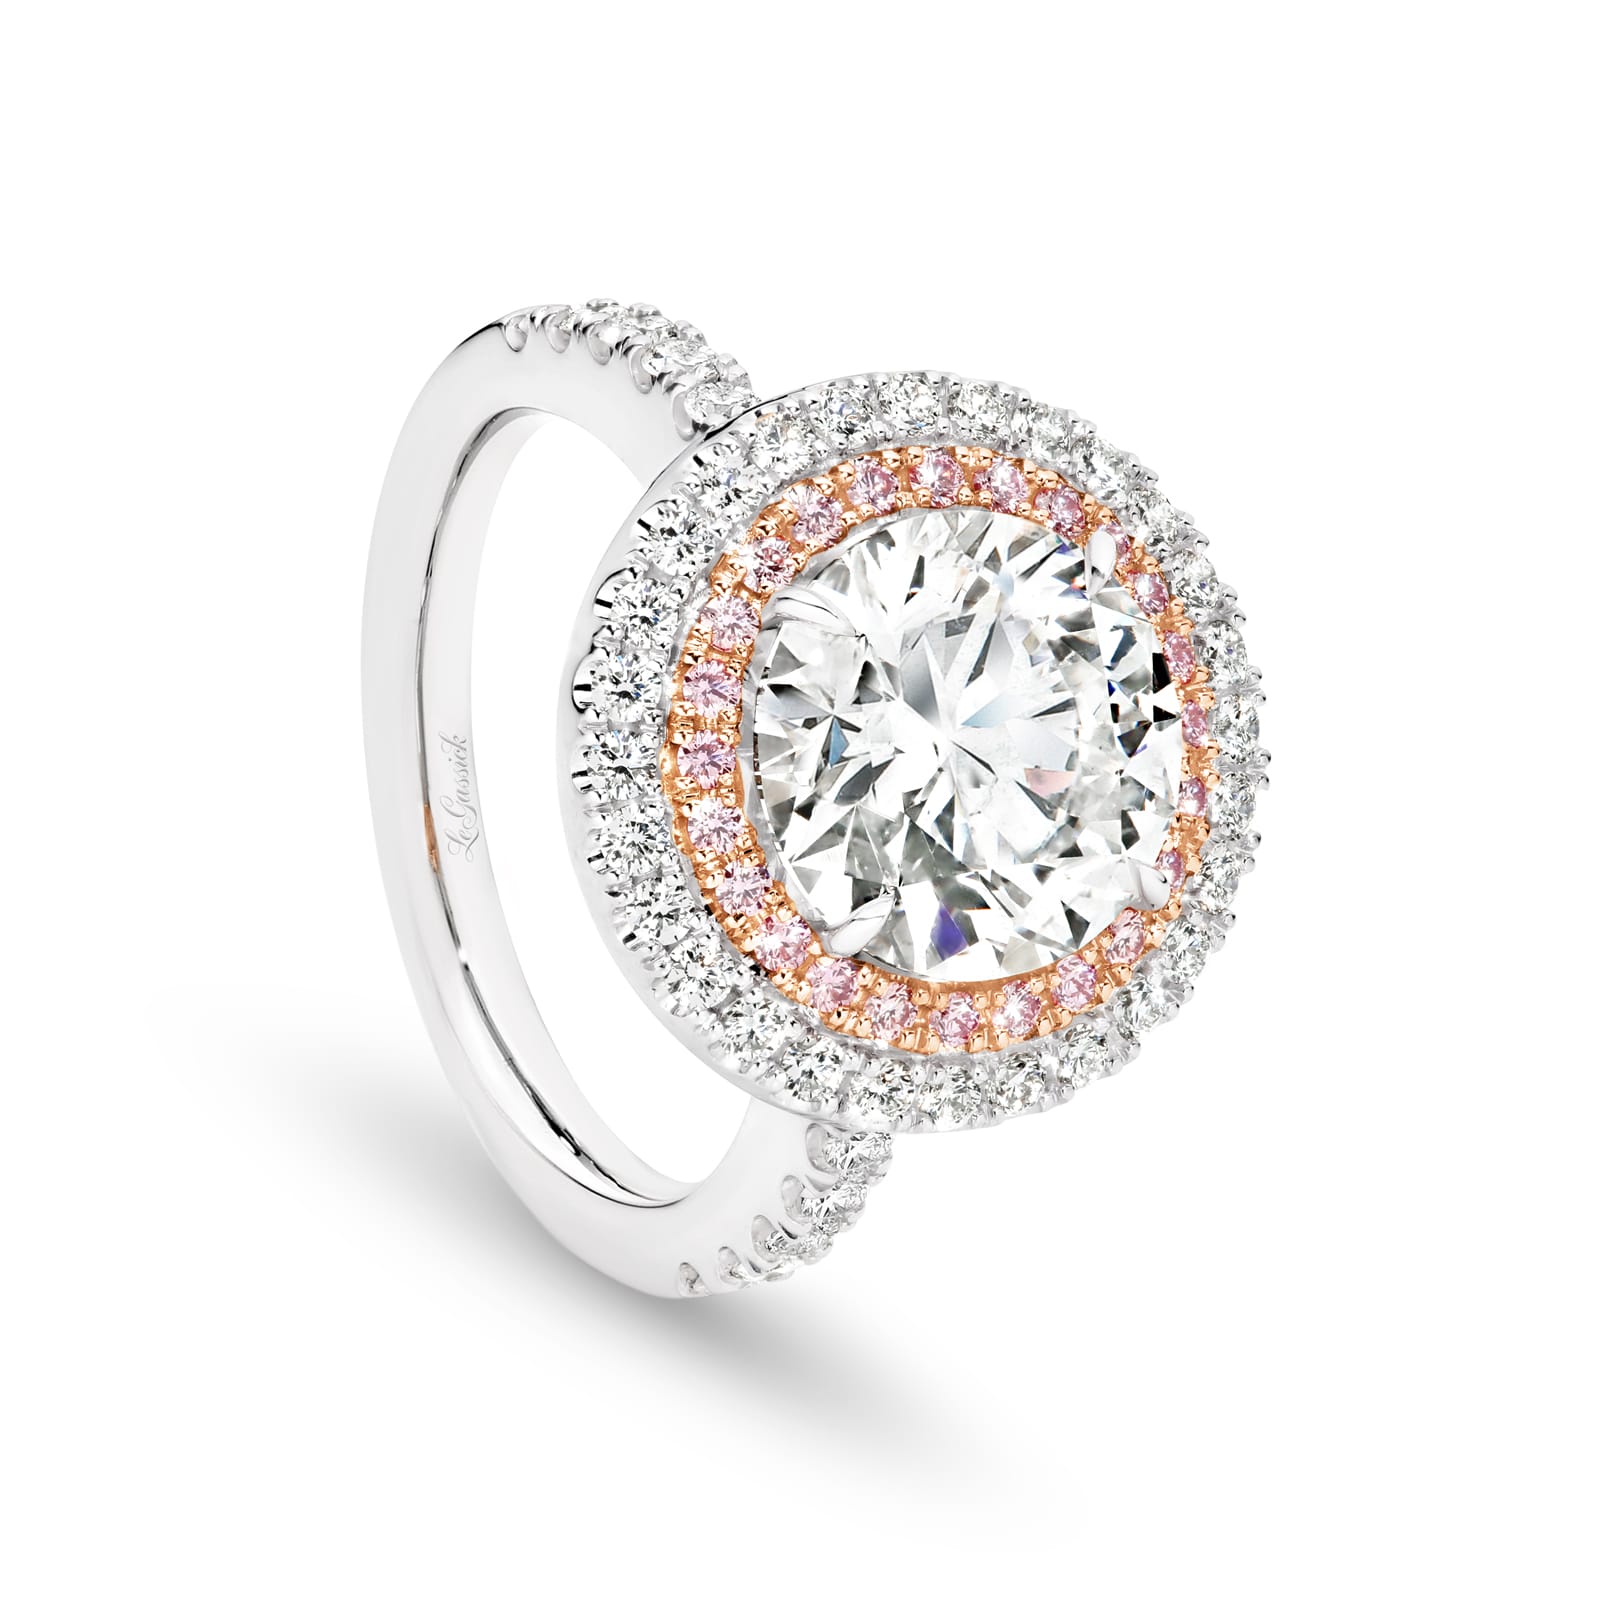 Cleopatra 4.51ct Round Brilliant Cut Diamond Ring part of the Beyond Luxury Collection by LeGassick.